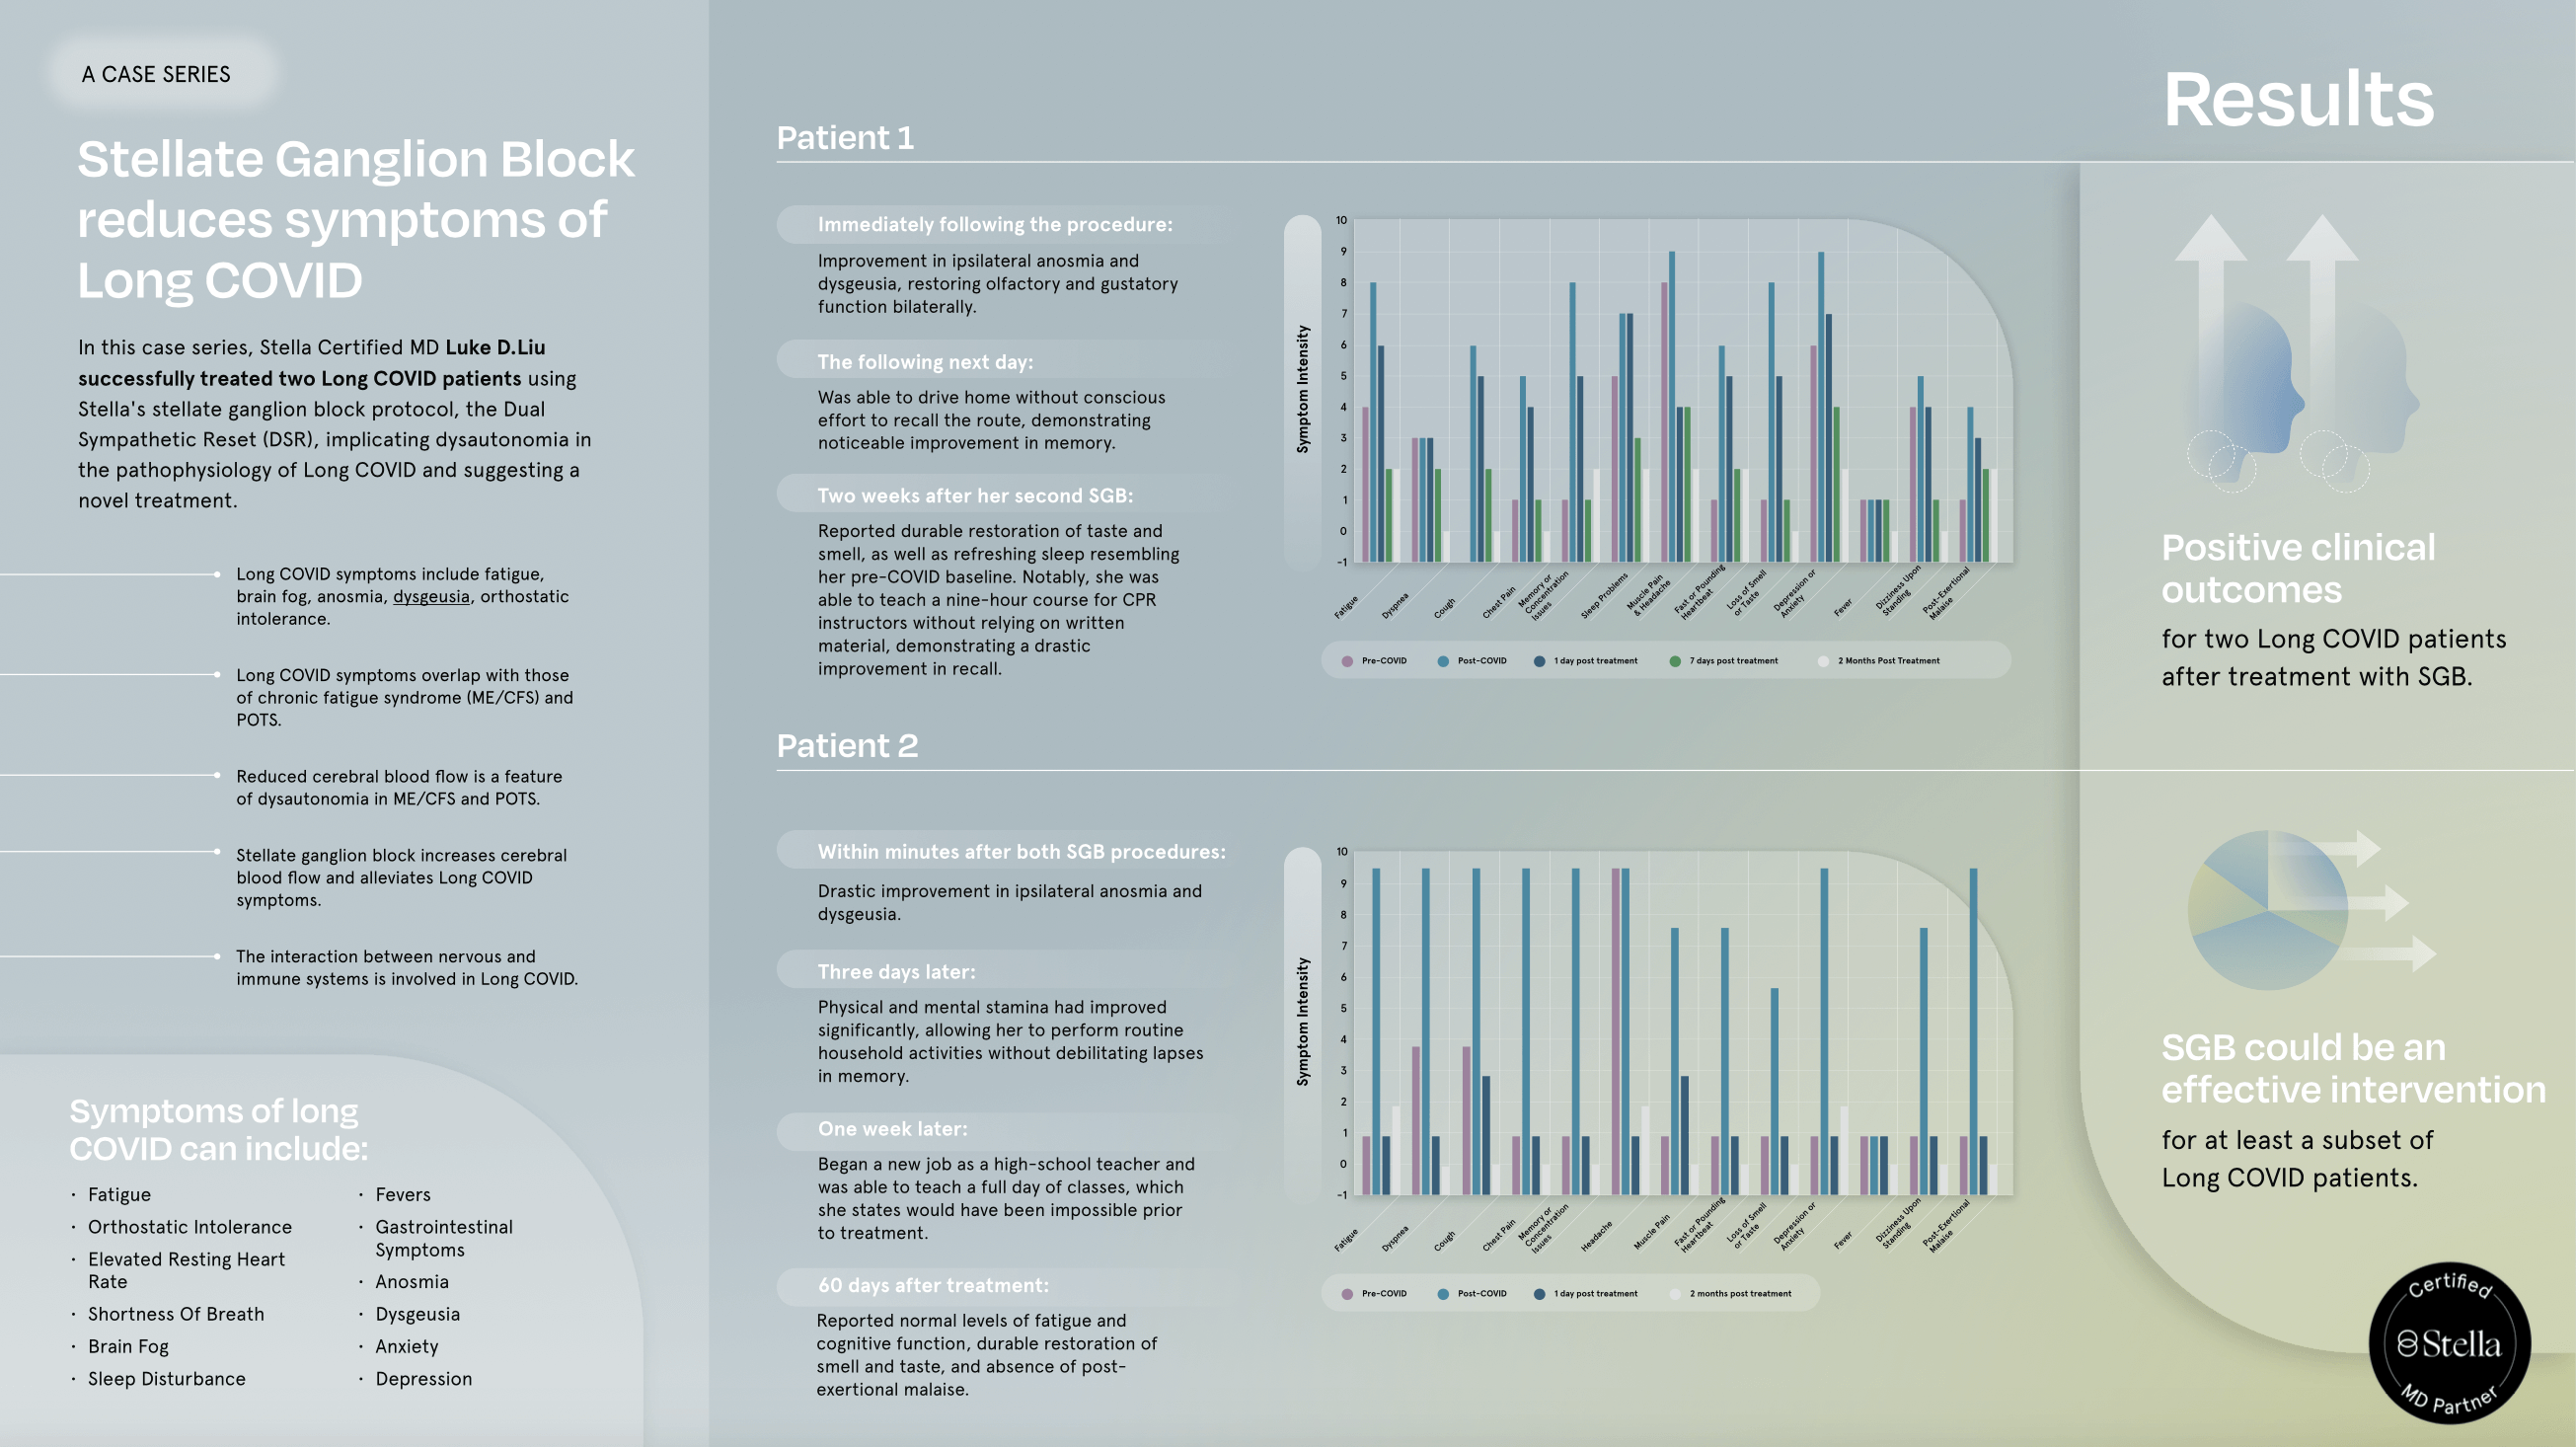 A case study graphic showing data surrounding SGB reducing symptoms of Long COVID